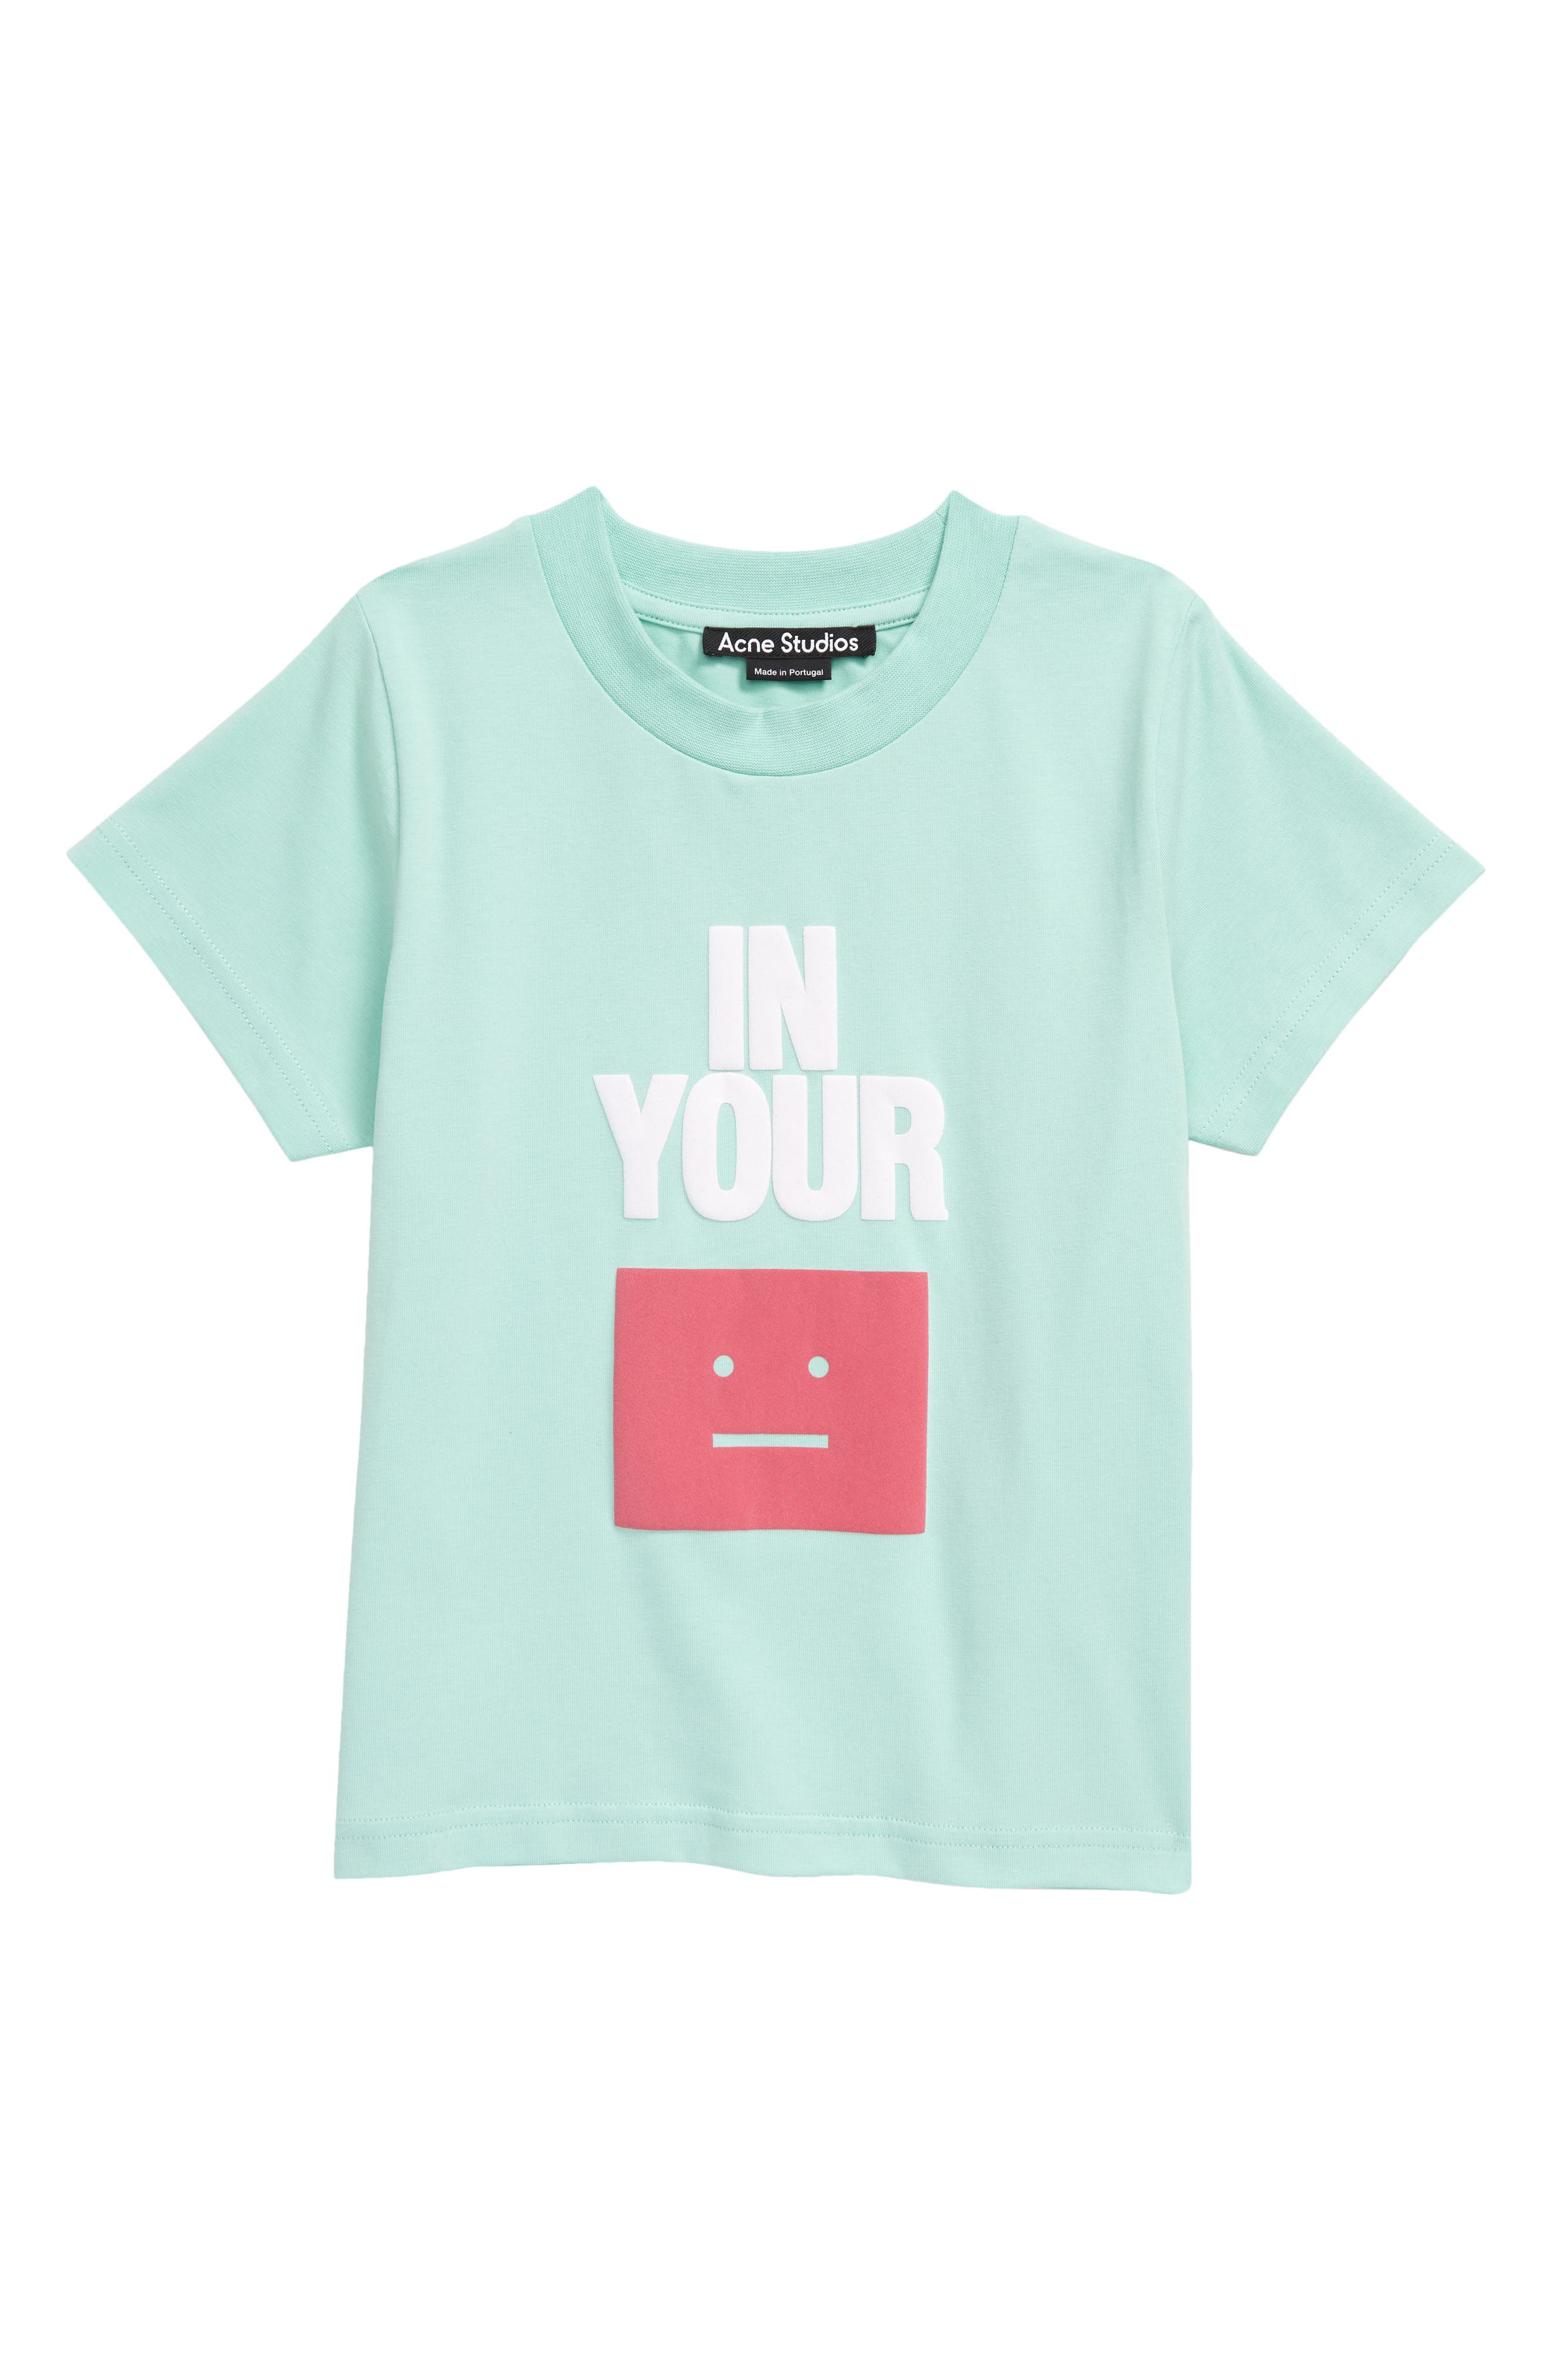 Acne Studios Kids' Nash Face Graphic Tee in Soft Green at Nordstrom, Size 6-8Y Us